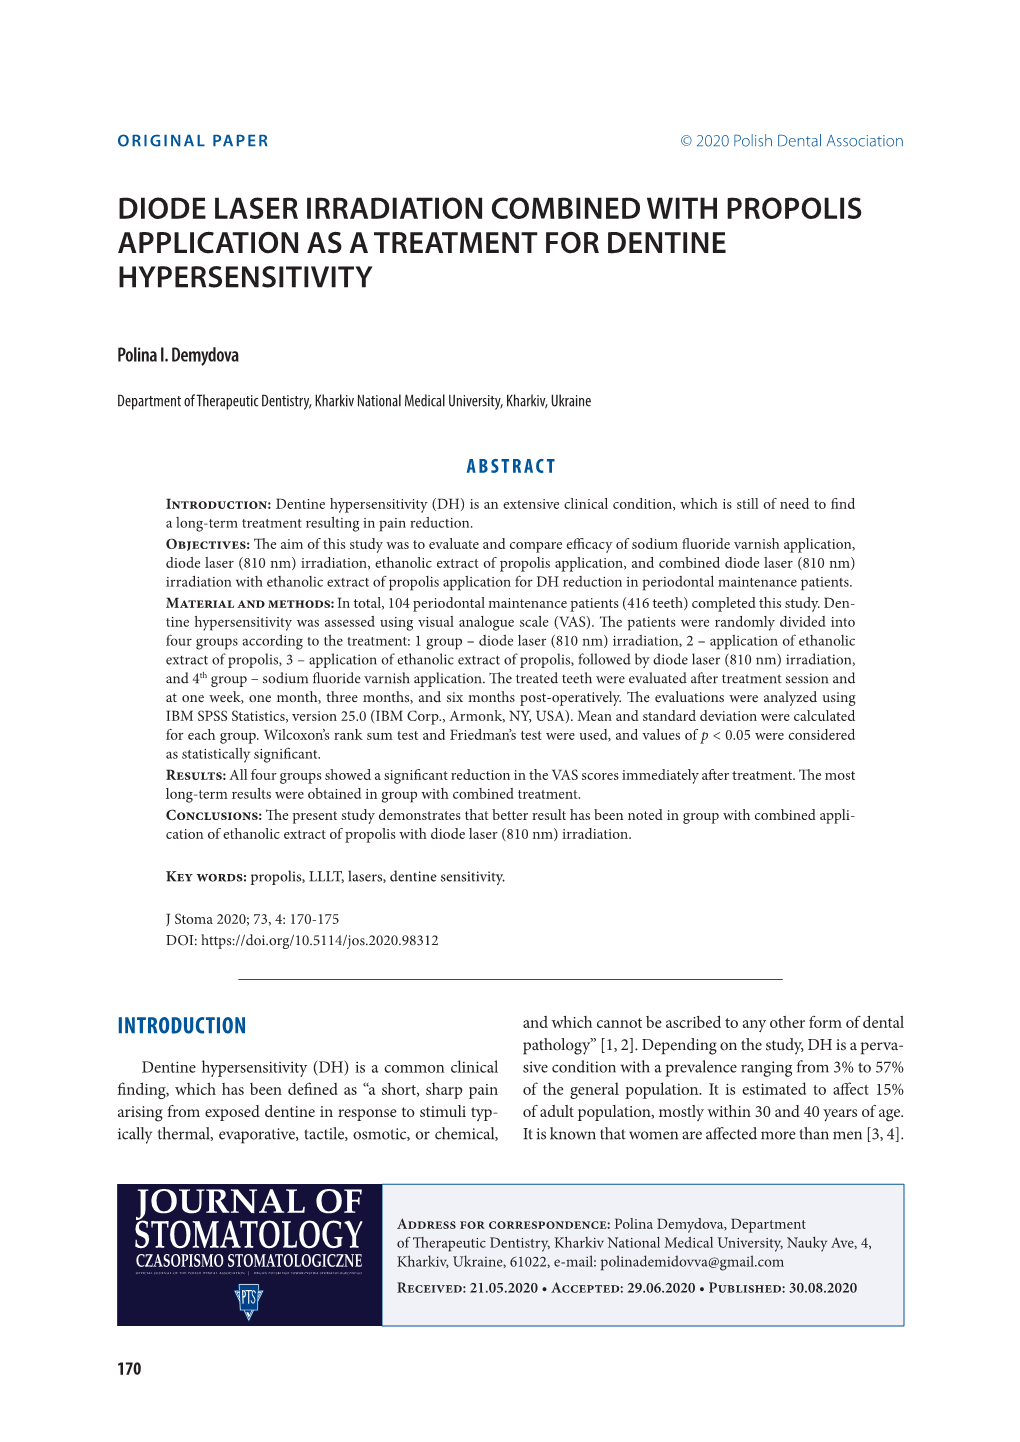 Diode Laser Irradiation Combined with Propolis Application As a Treatment for Dentine Hypersensitivity